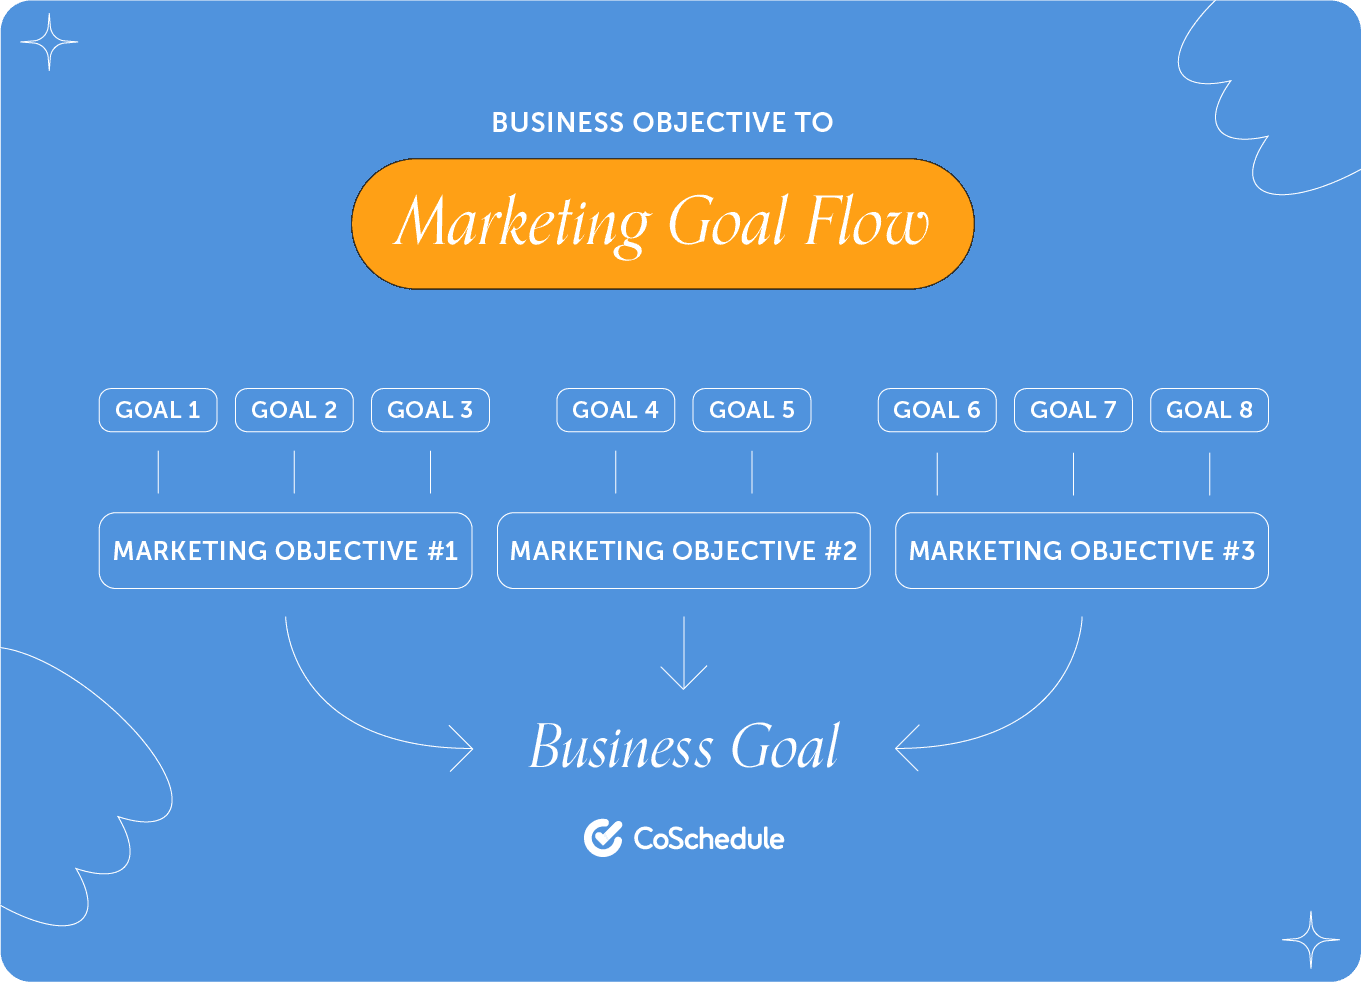 CoSchedule presents the Marketing goal flow which includes eight goals that go in to three marketing objectives which then point to the business goal.